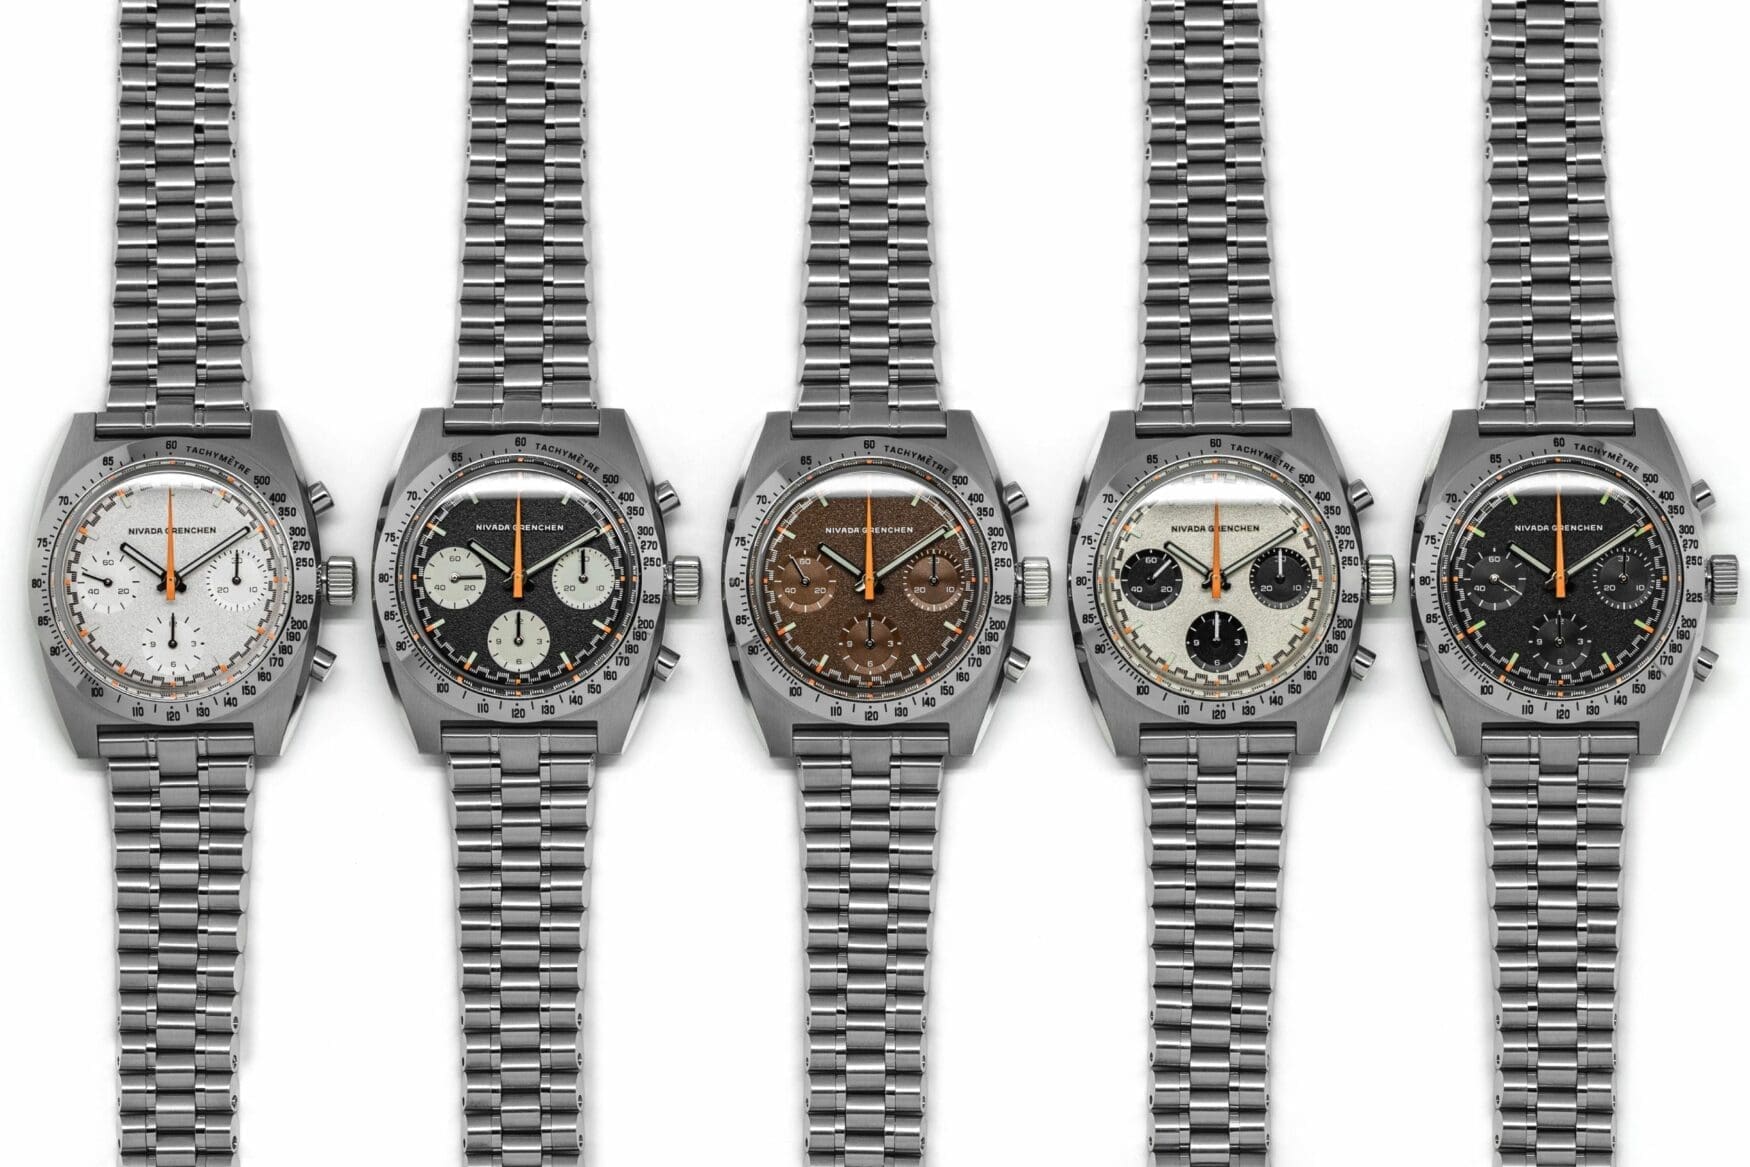 INTRODUCING: The Nivada Grenchen Racing Chronograph for Fratello